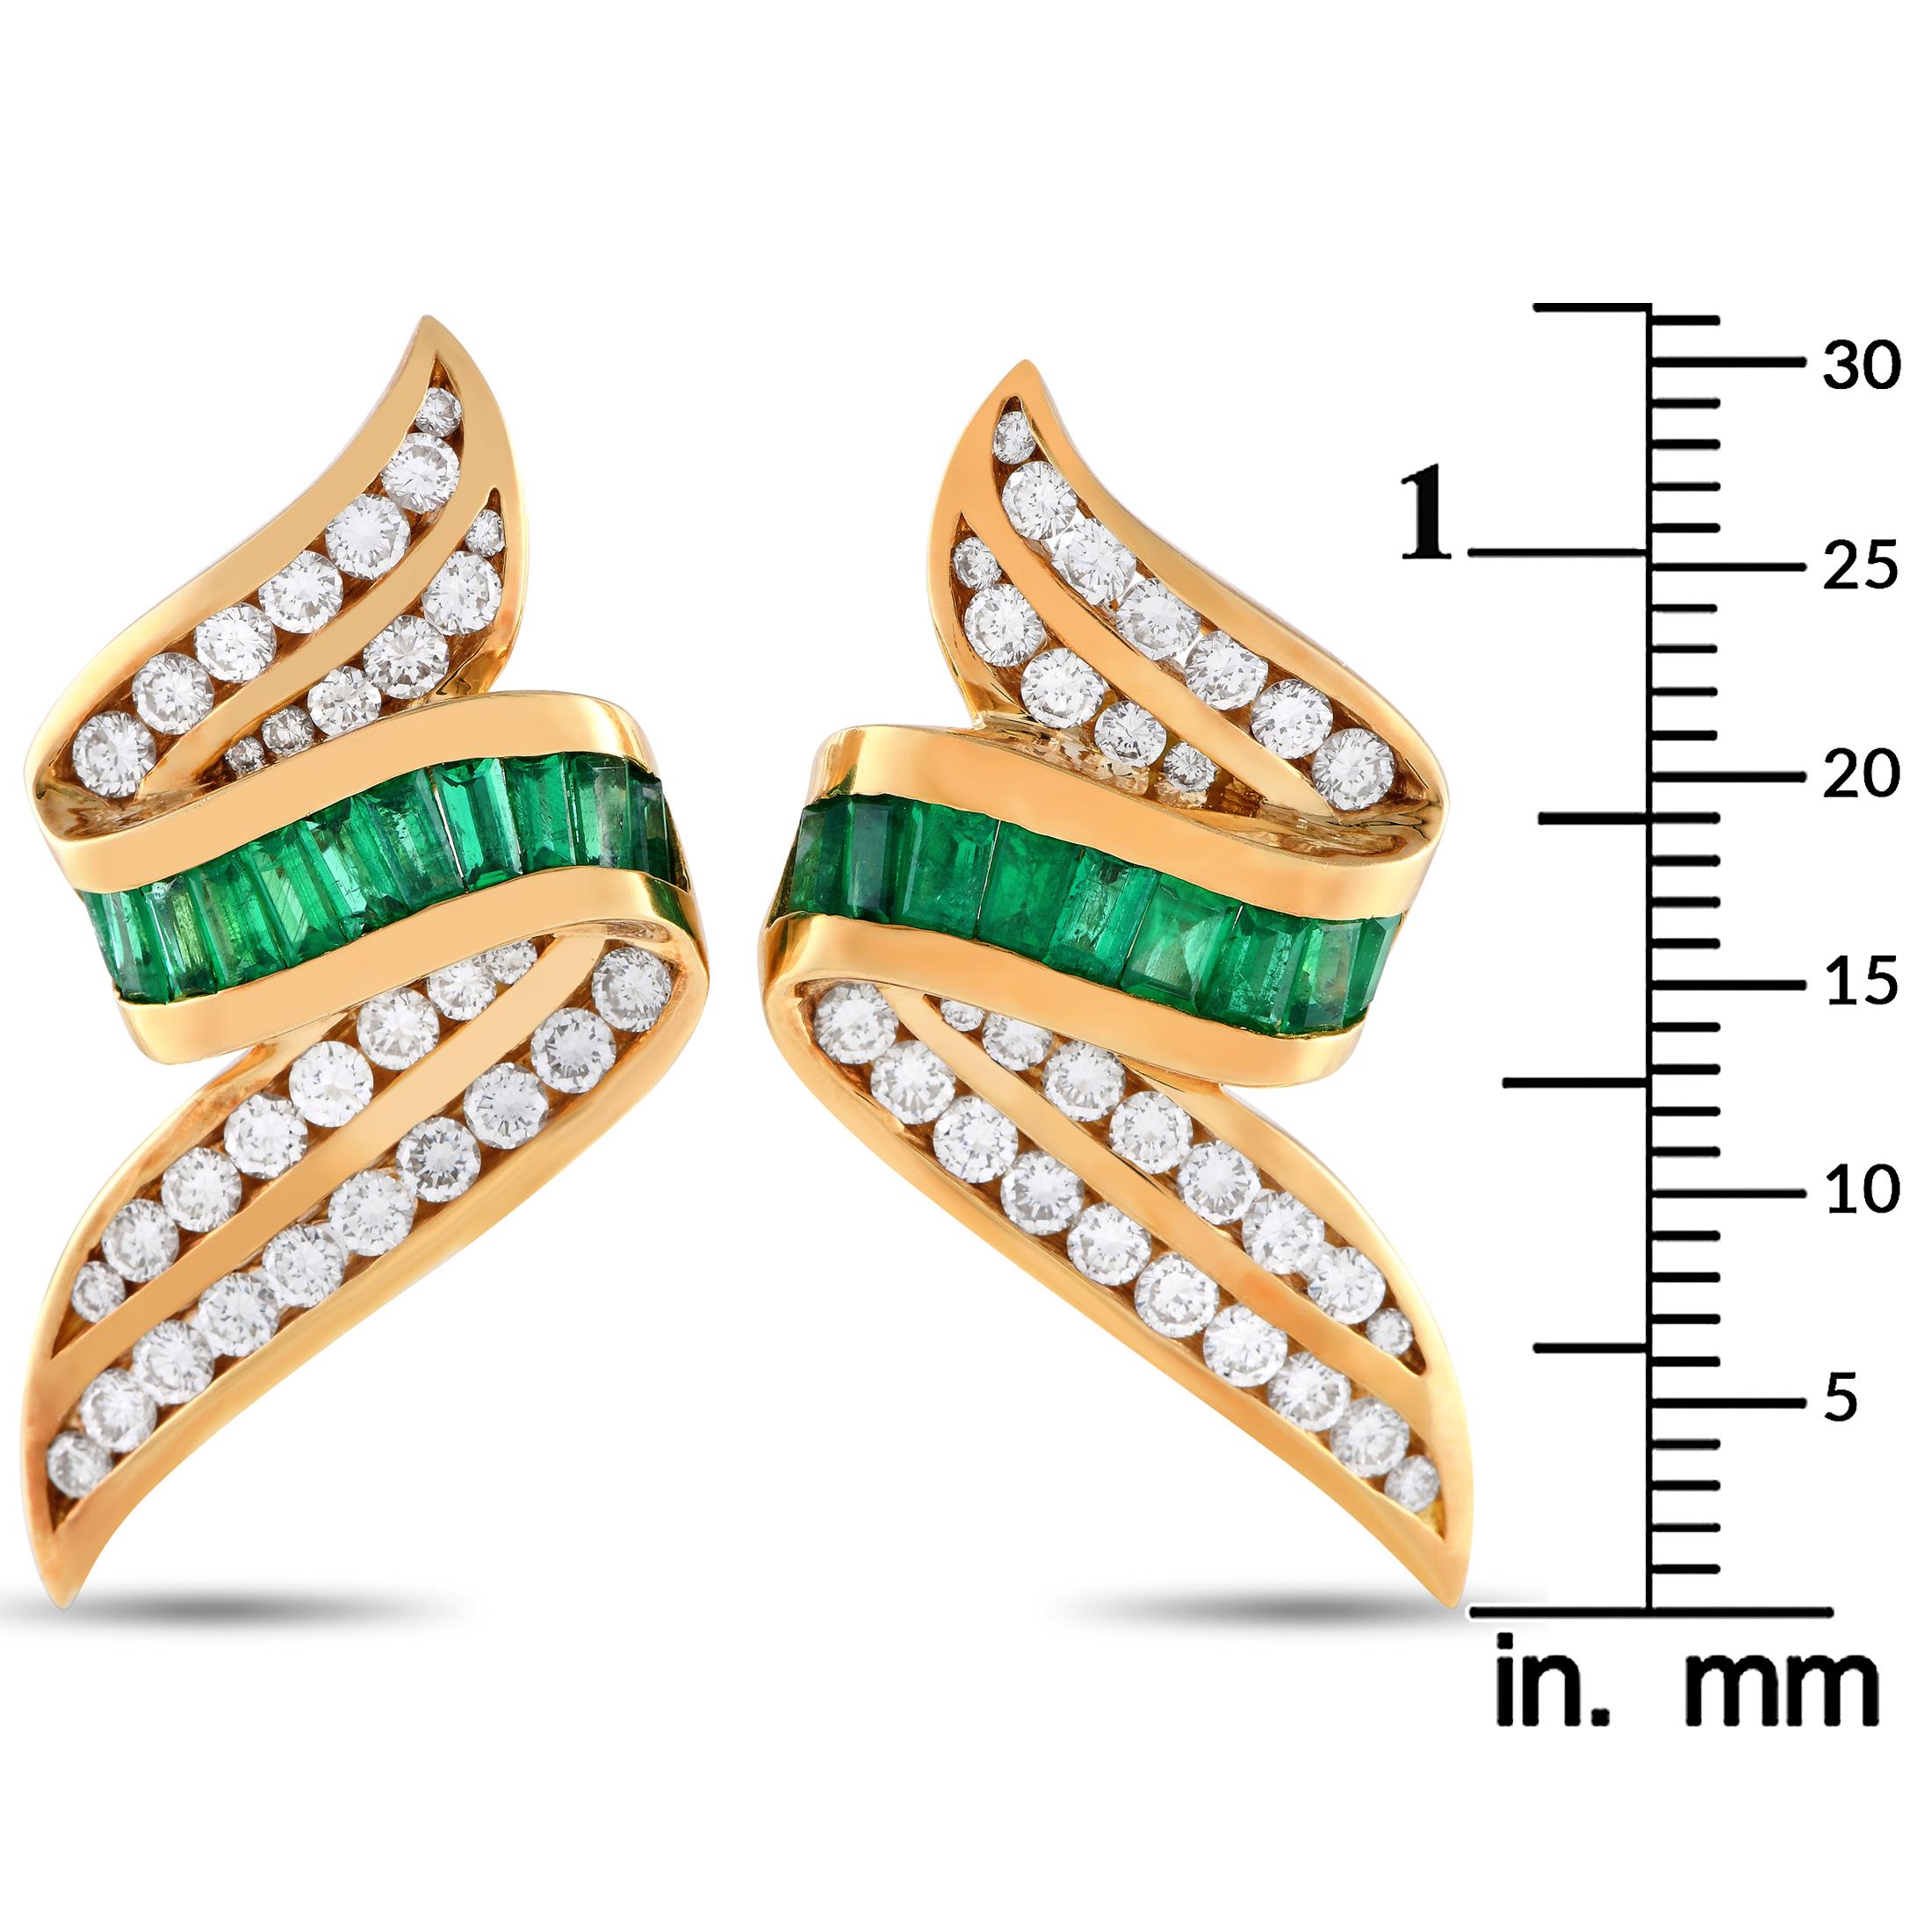 Charles Krypell 18k Yellow Gold 2.50 Carat Diamond and Emerald Earrings In Excellent Condition For Sale In Southampton, PA